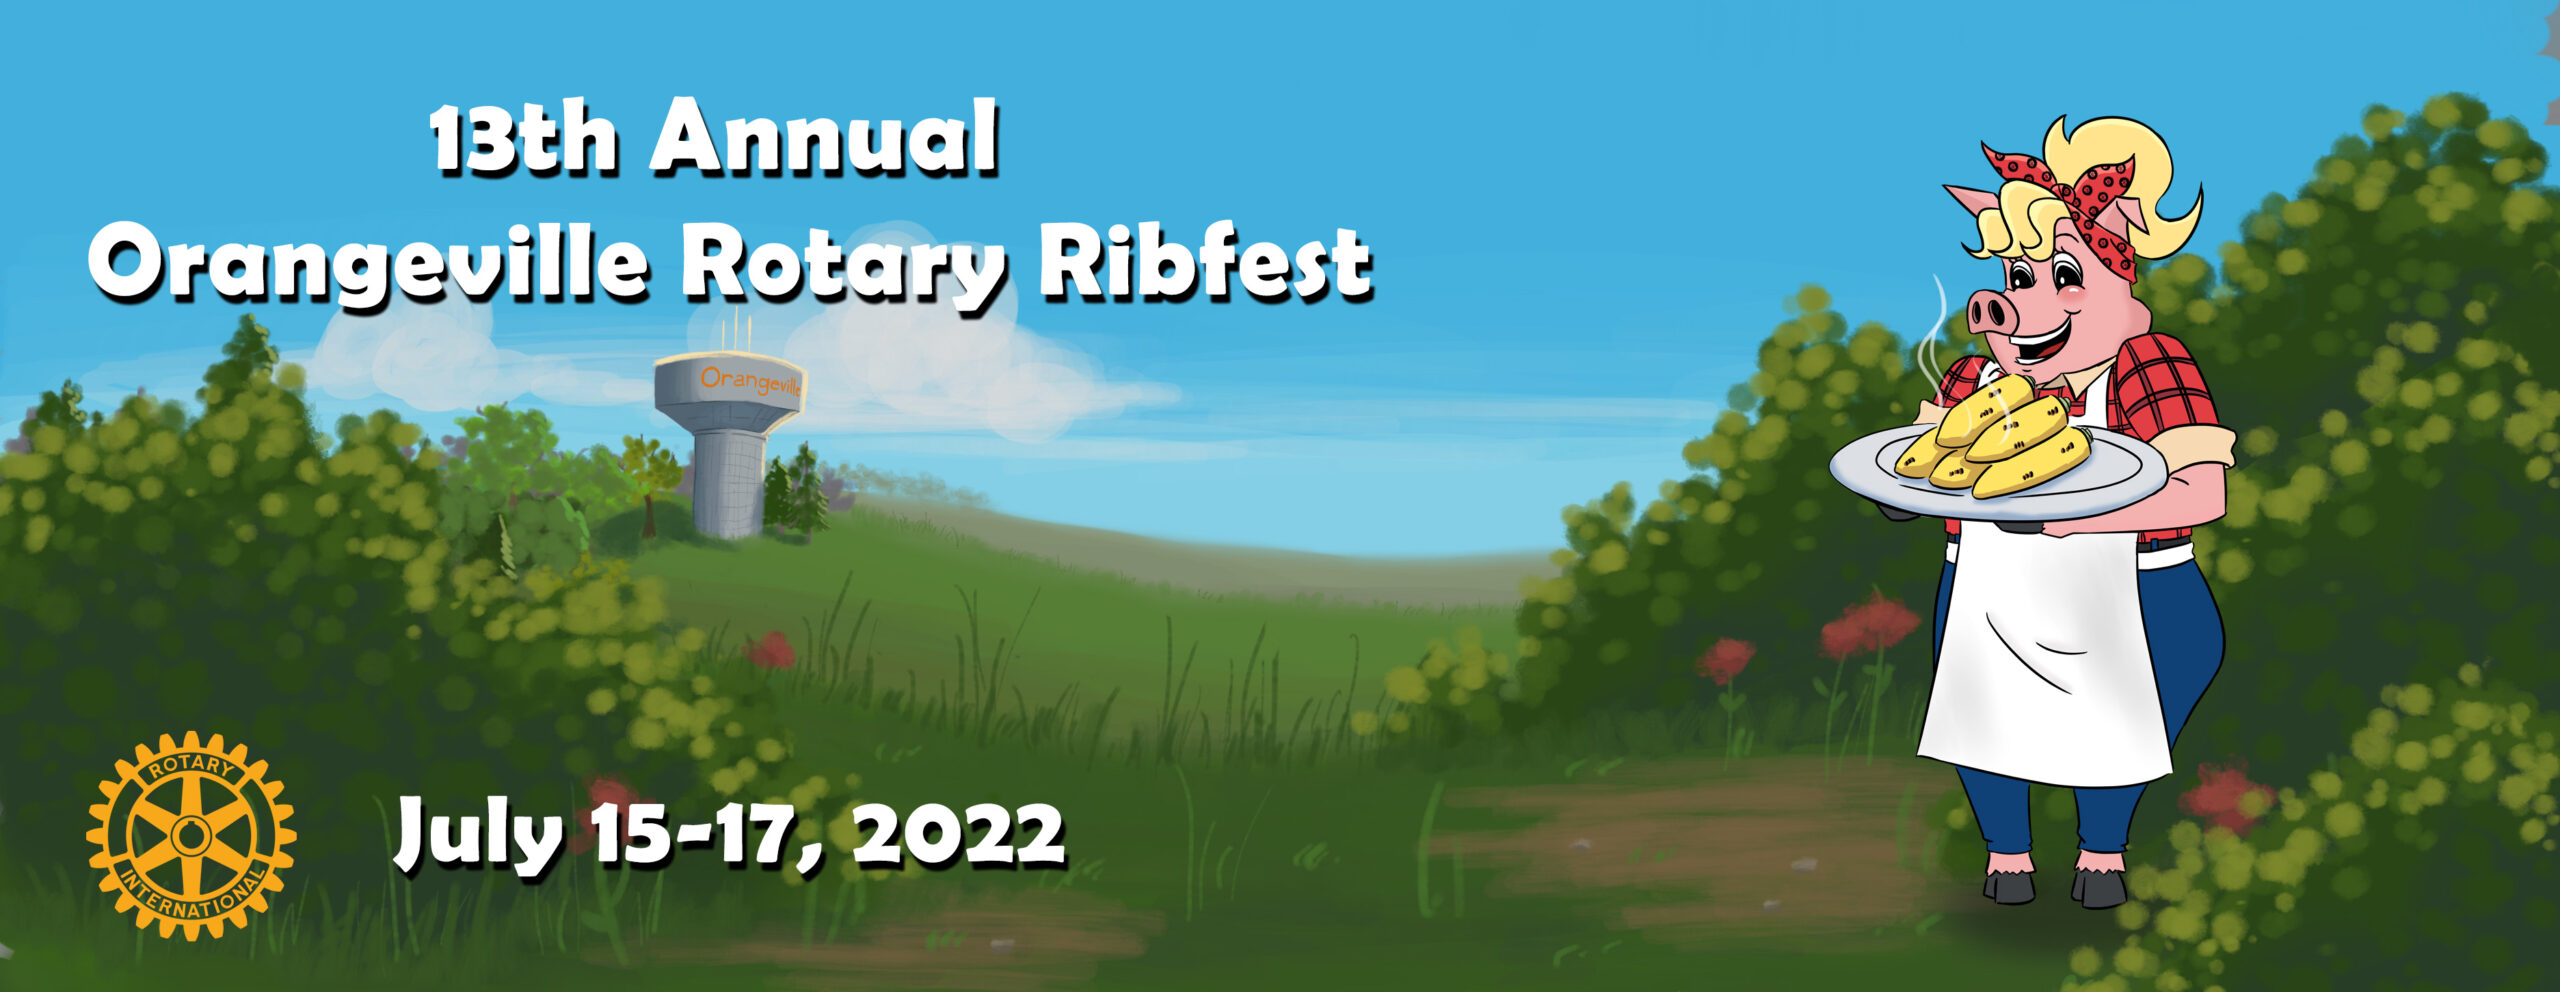 Cartoon image of a field with the Orangeville water tower in background, and the female mascot announcing 13th Annual Orangeville Rotary Ribfest on July 15 to 17, 2022.